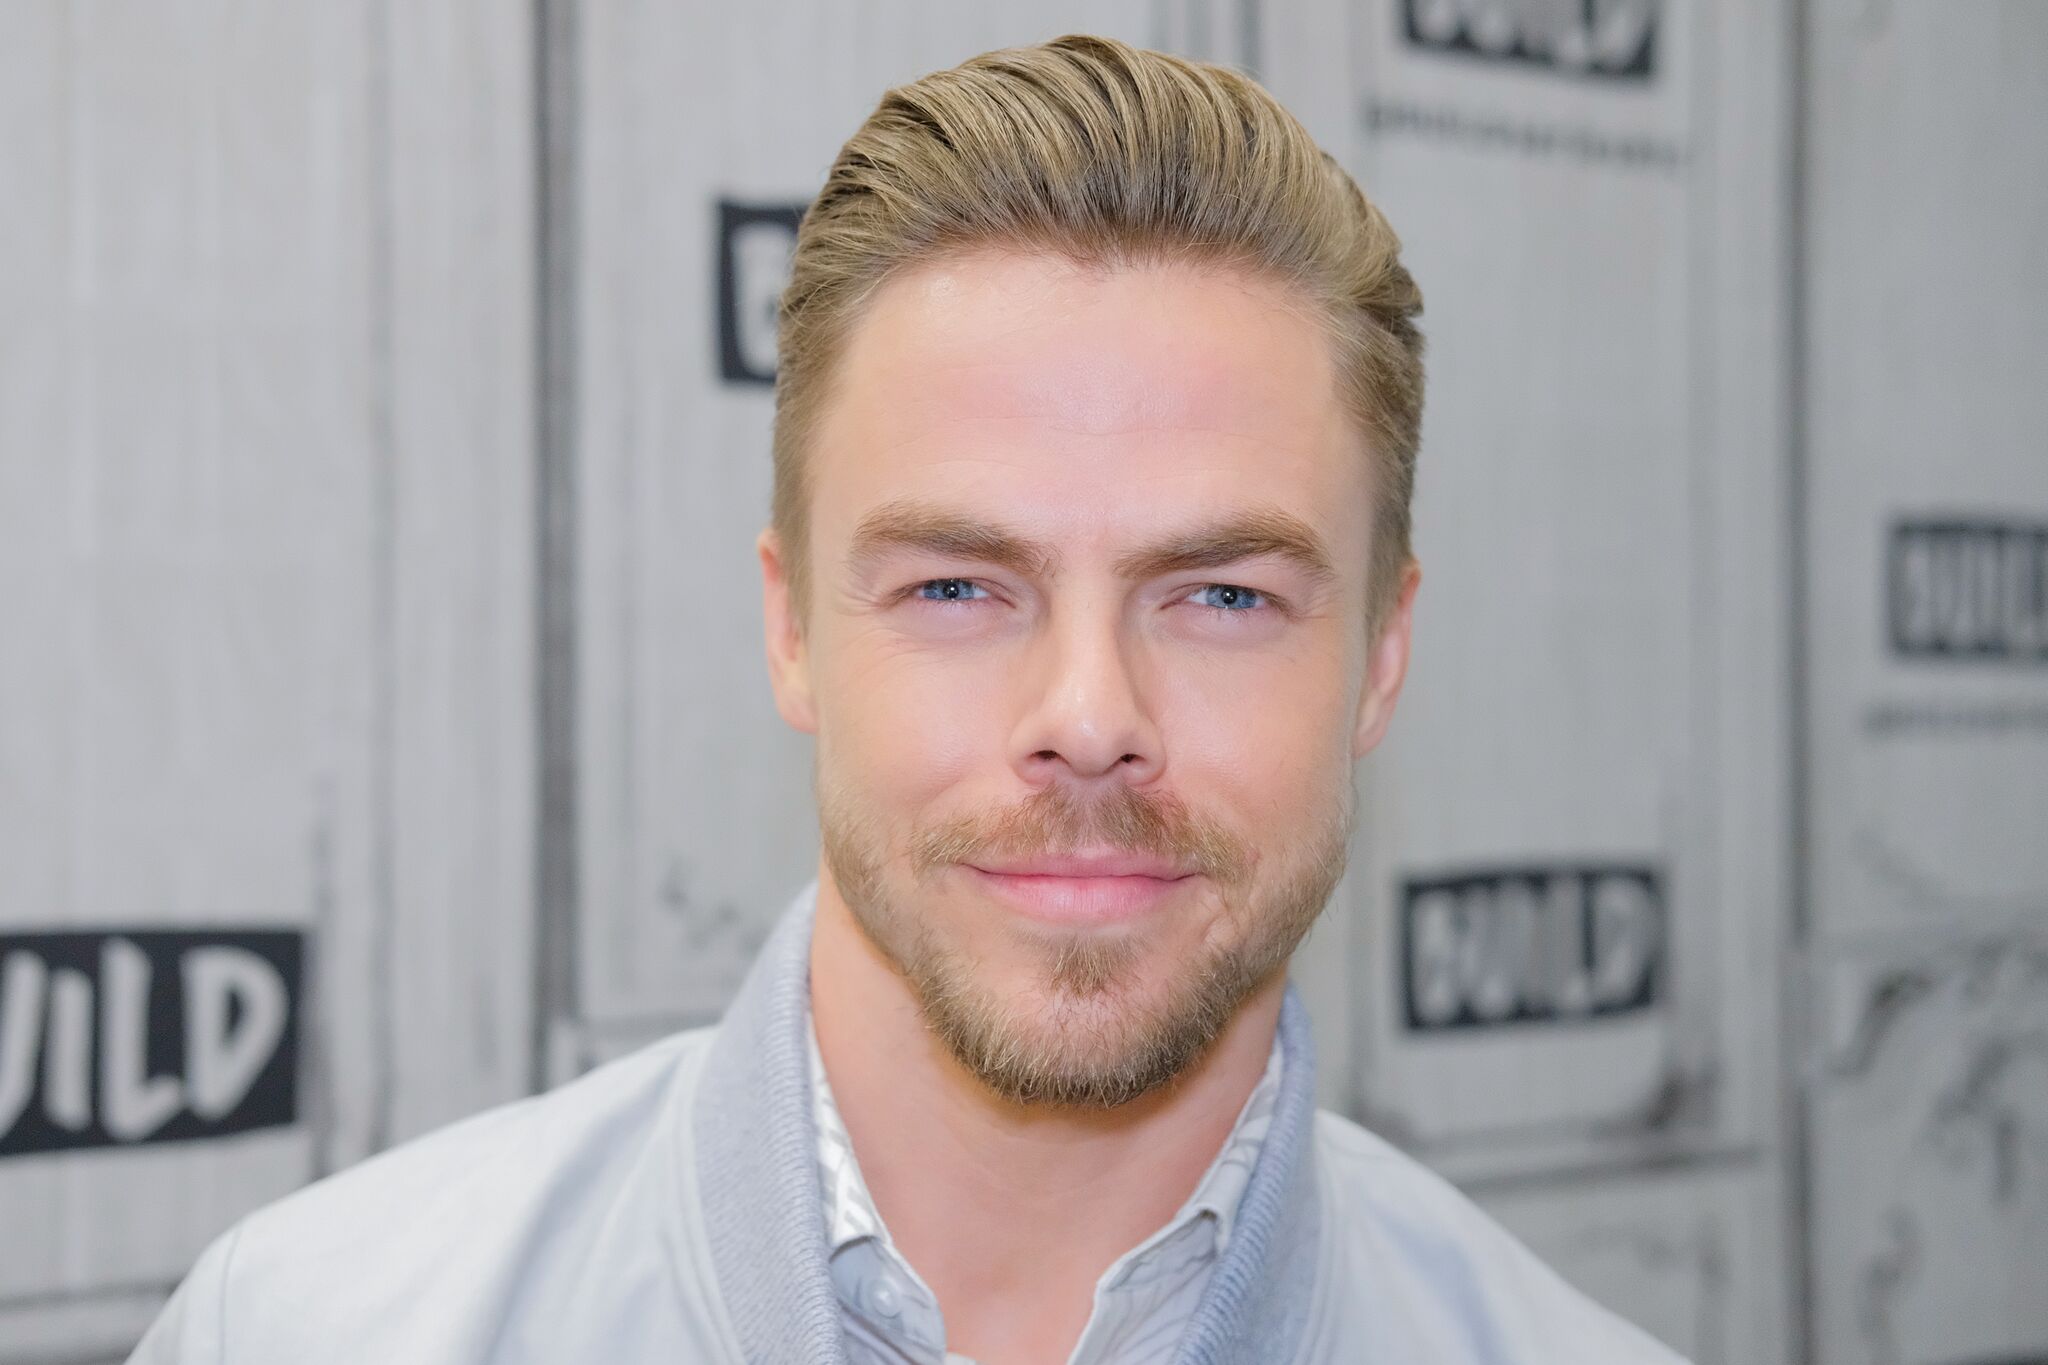 Professional dancer Derek Hough discusses the new show, 'World of Dance', at Build Studio on June 5, 2017 | Photo: Getty Images